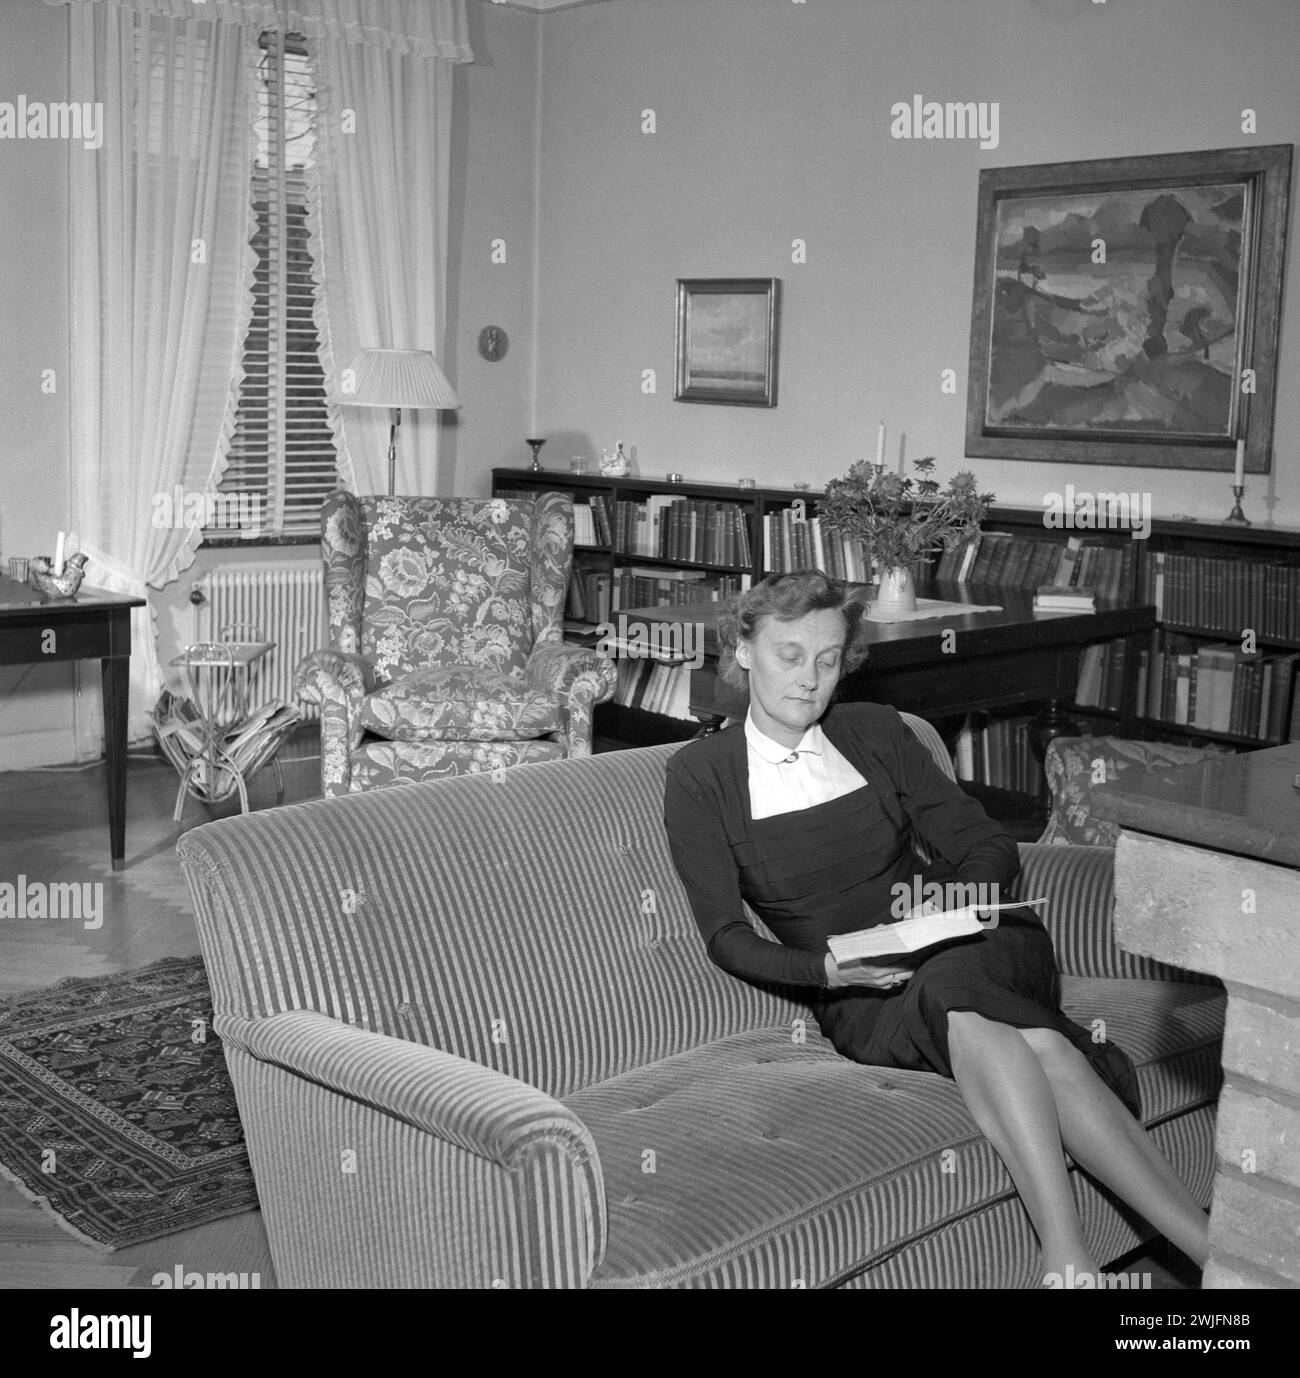 Astrid Lindgren (1907-2002) Swedish children's book author. Astrid at home in her apartment on Dalagatan 46 in Stockholm October 16, 1953Photo: Erich Conrad / Sjöberg Archive / TT / Code 2900 Stock Photo